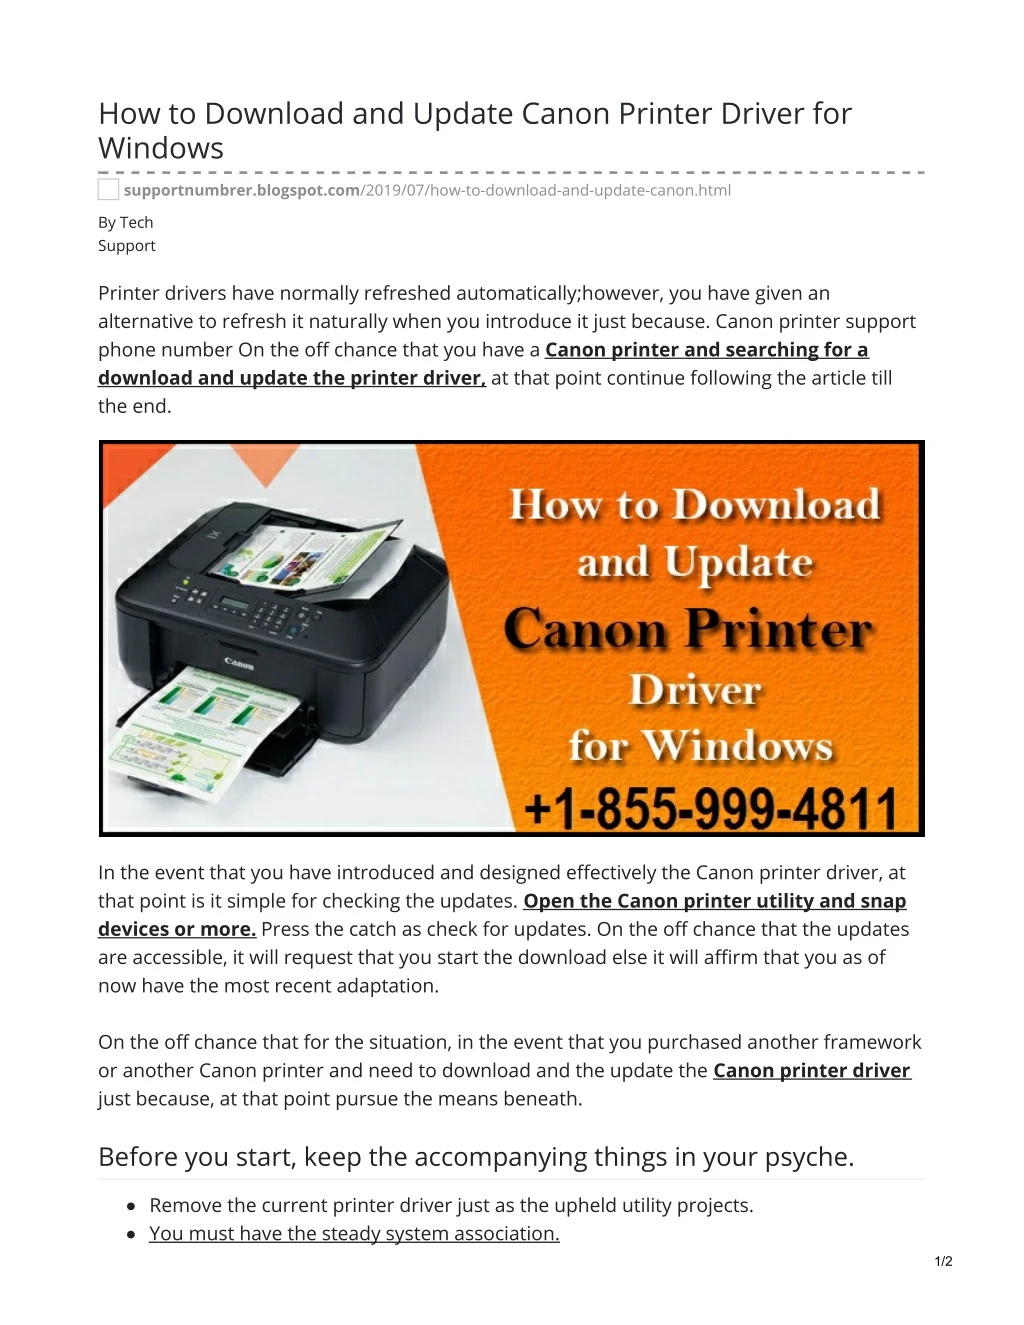 how to download and update canon printer driver